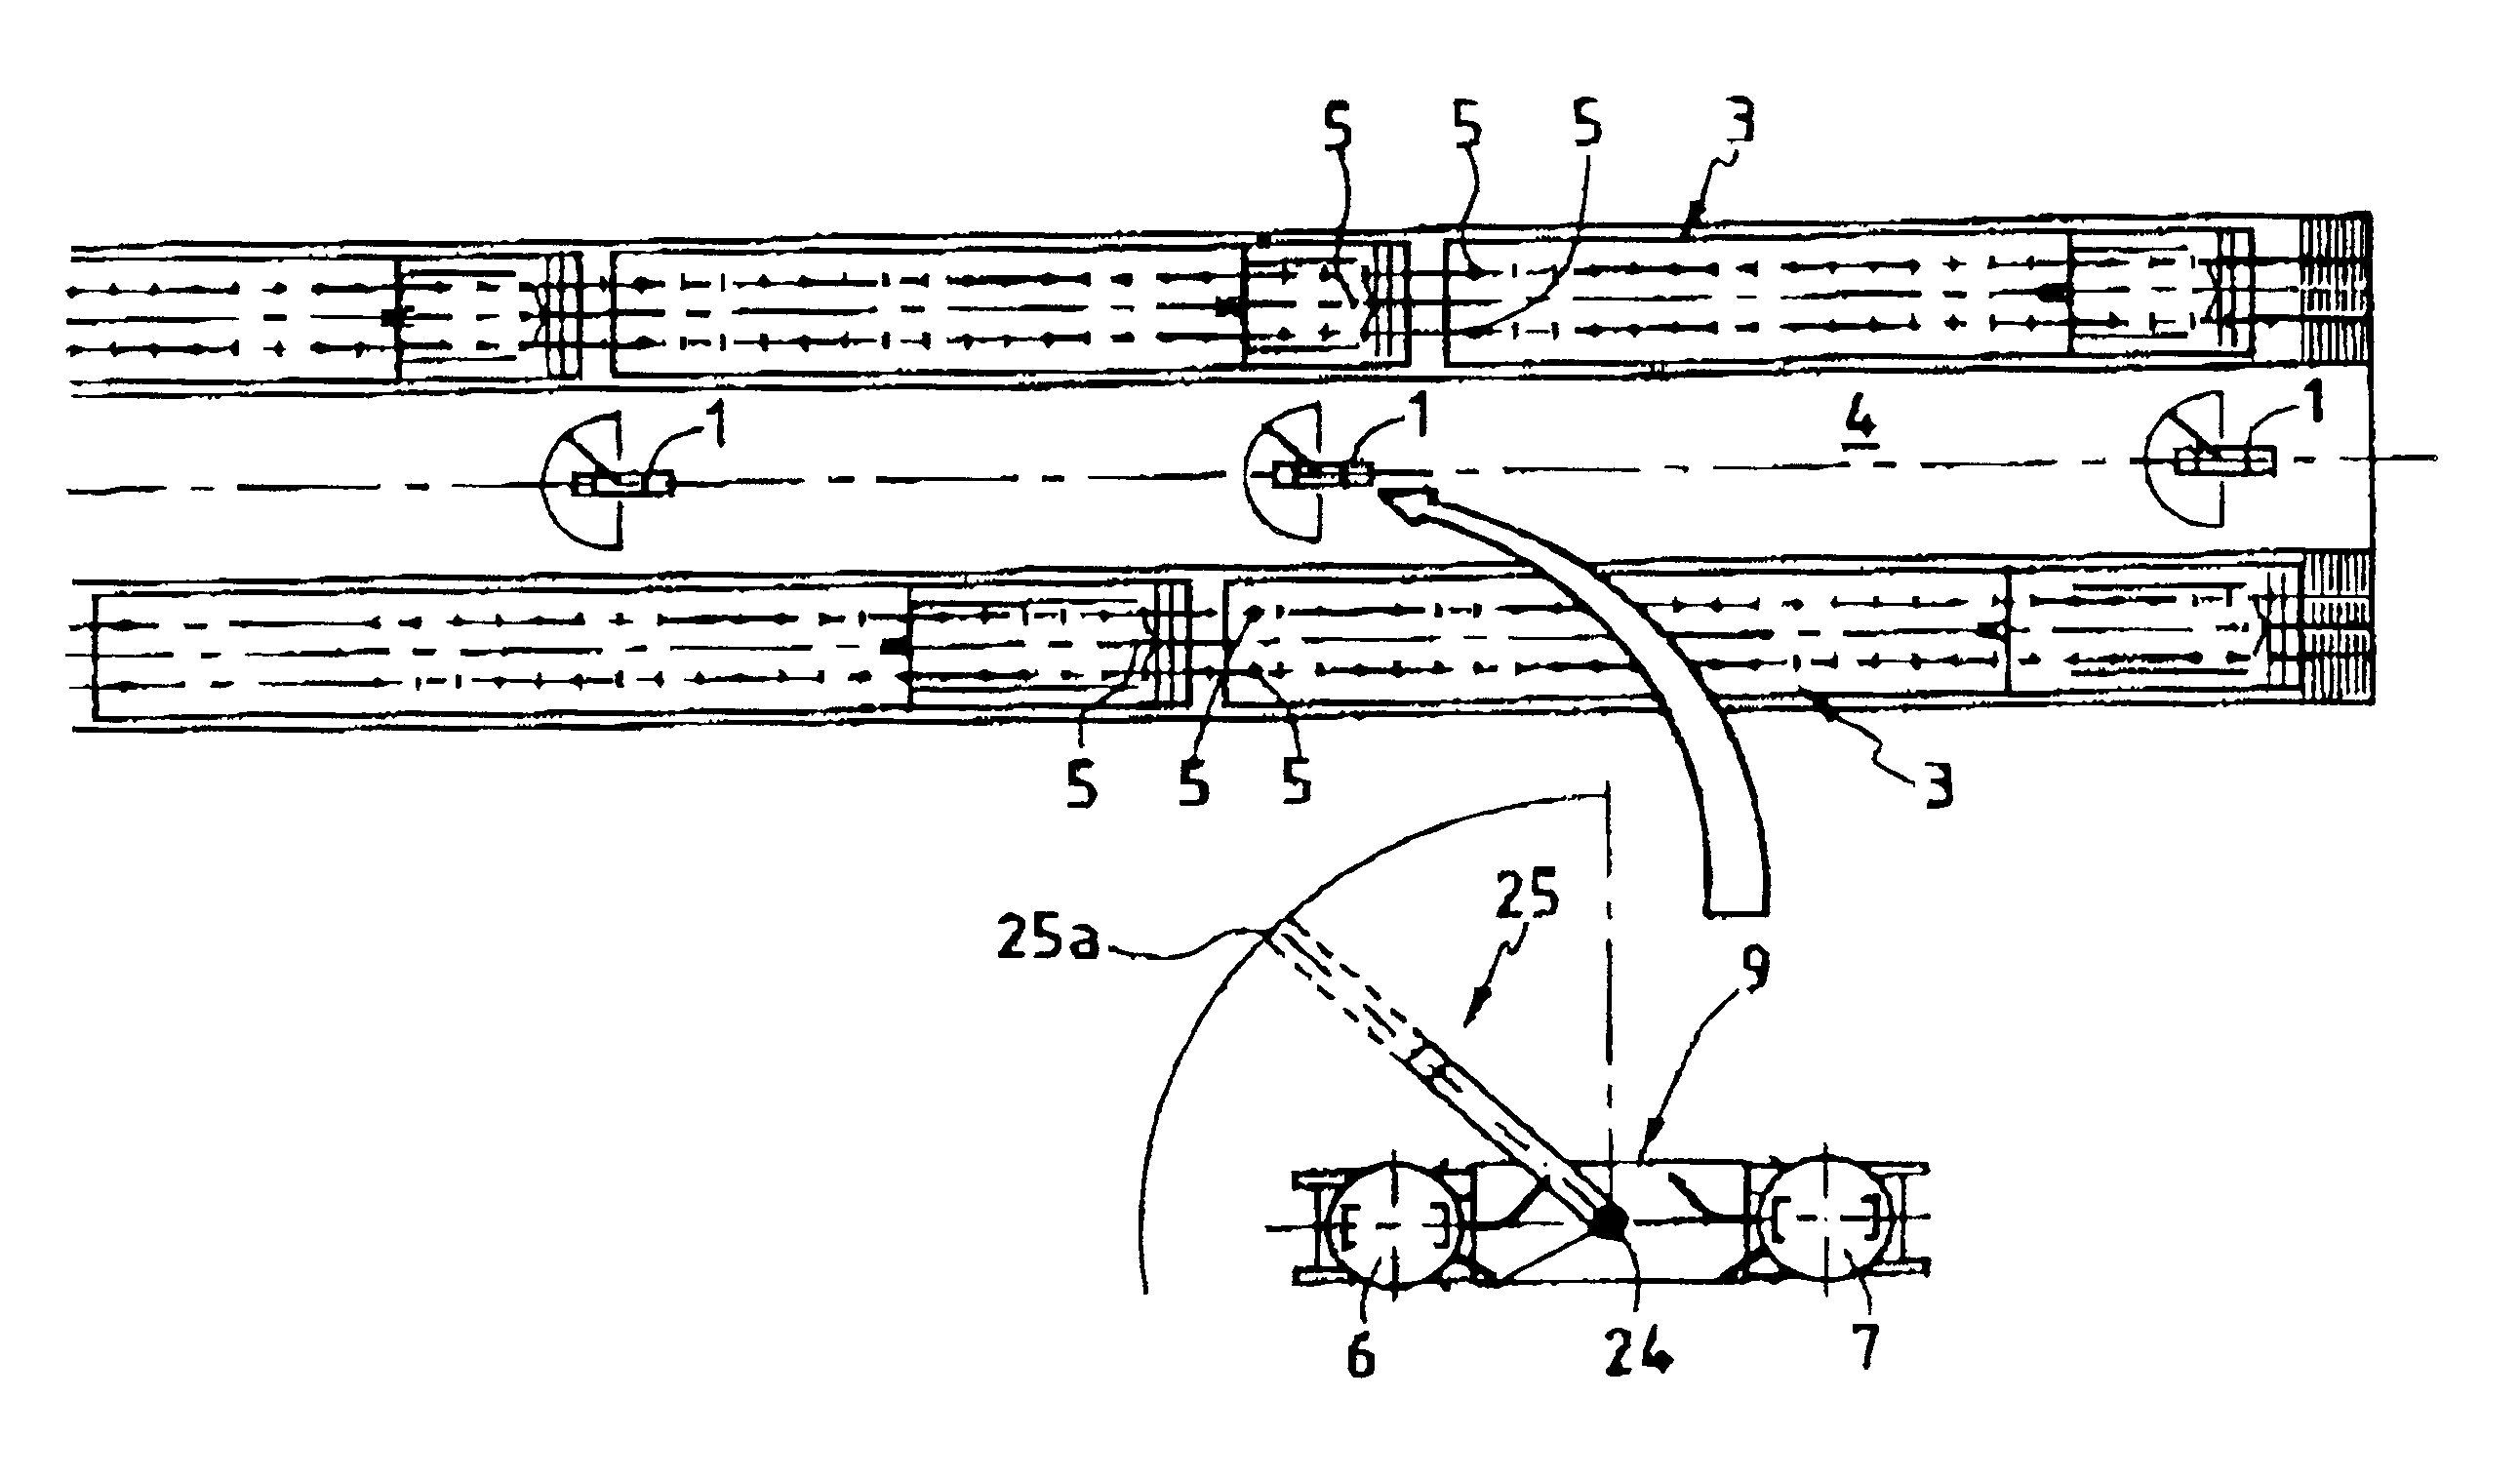 Granular material distributing apparatus comprising at least two transfer vessels that operate in alternation